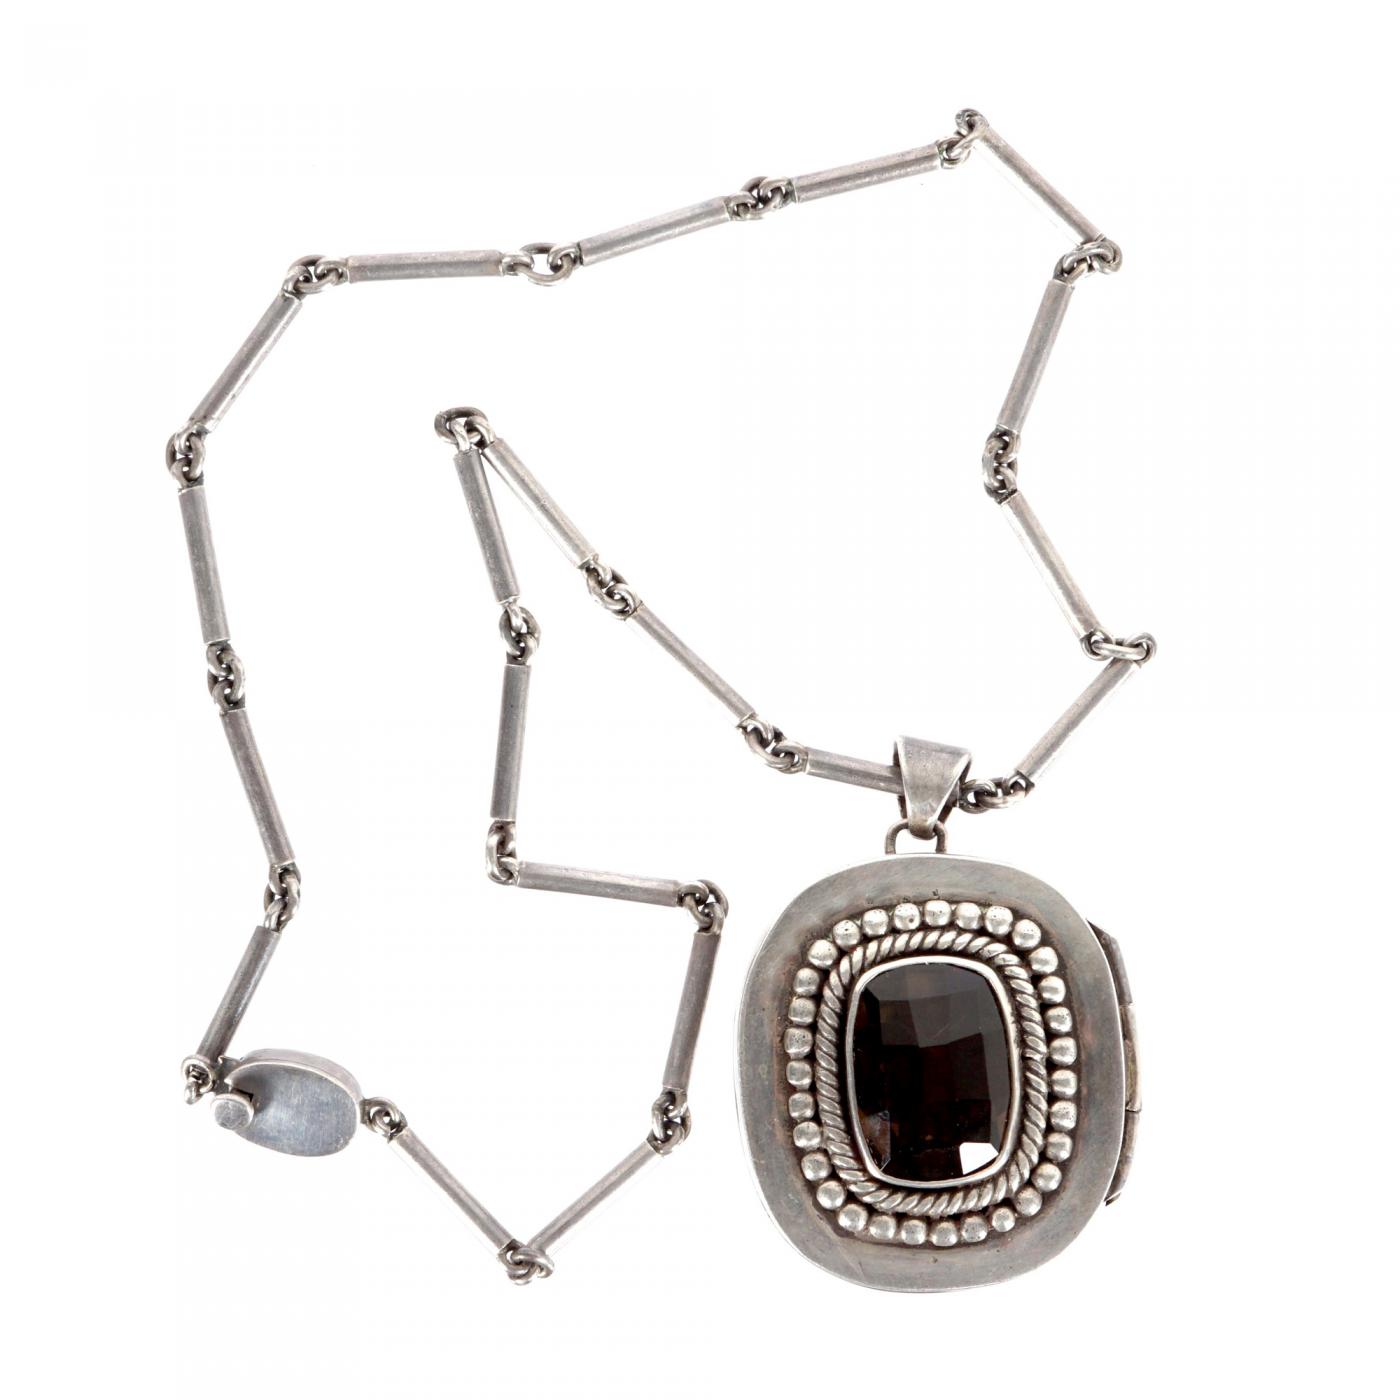 Antonio Pineda - Mexican Modernist Silver Necklace from Taxco by